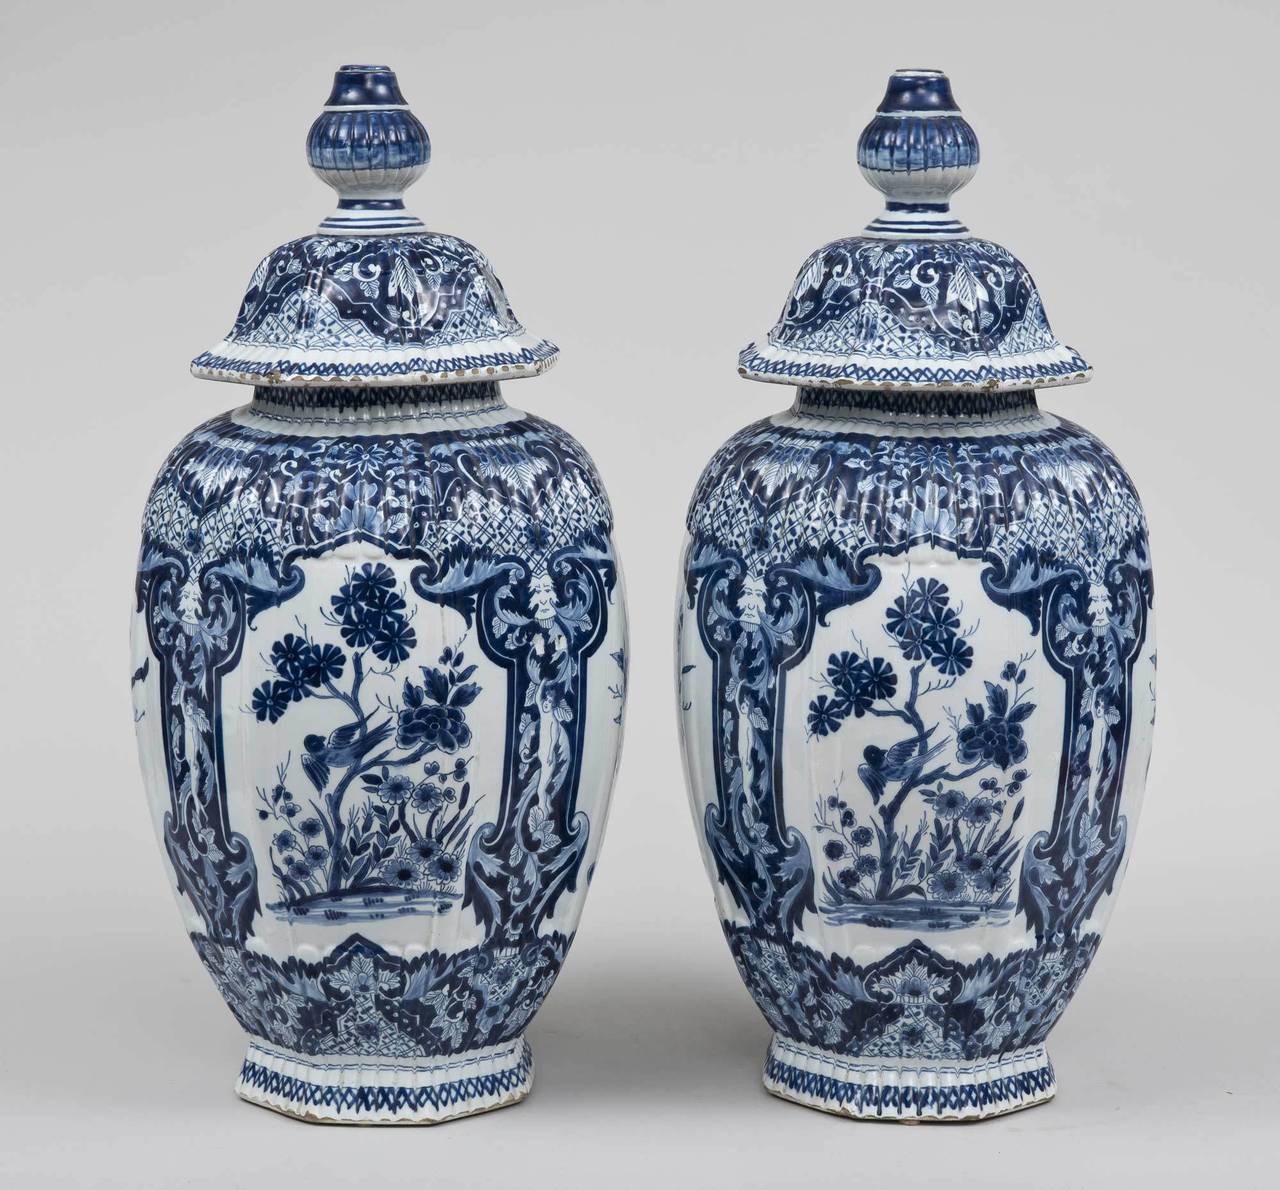 Pair of large blue and white Dutch Delft vases, the lids with bulbous shaped finials, octagonal and ribbed sides comprised of four panels decorated with flower urns, birds in trees and separated by narrow panels of putti topped by a masque. The